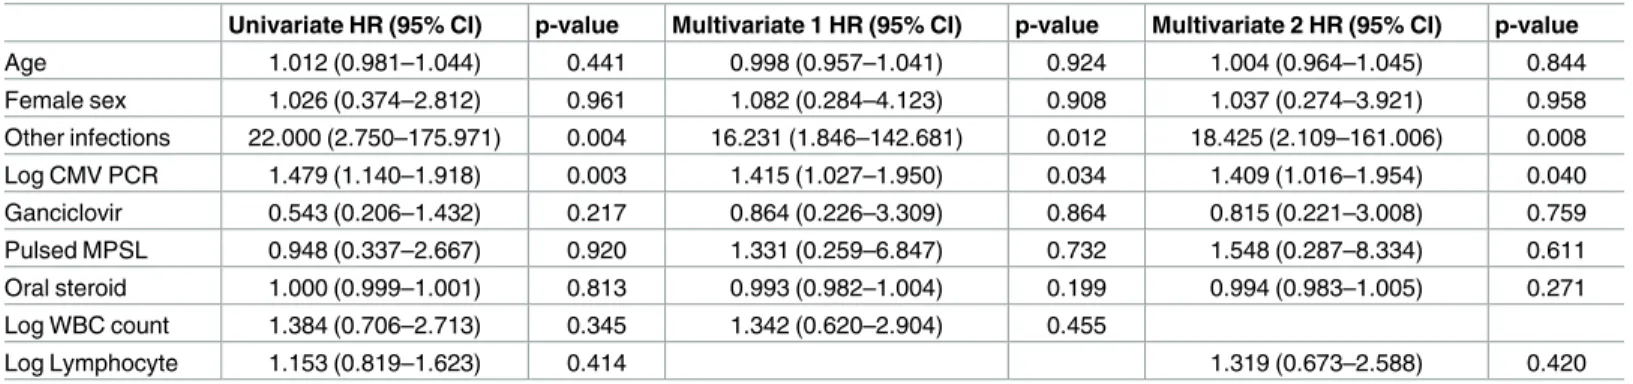 Table 5. Survival outcomes associated with mortality risk factor among cytomegalovirus (CMV)-infected patients.